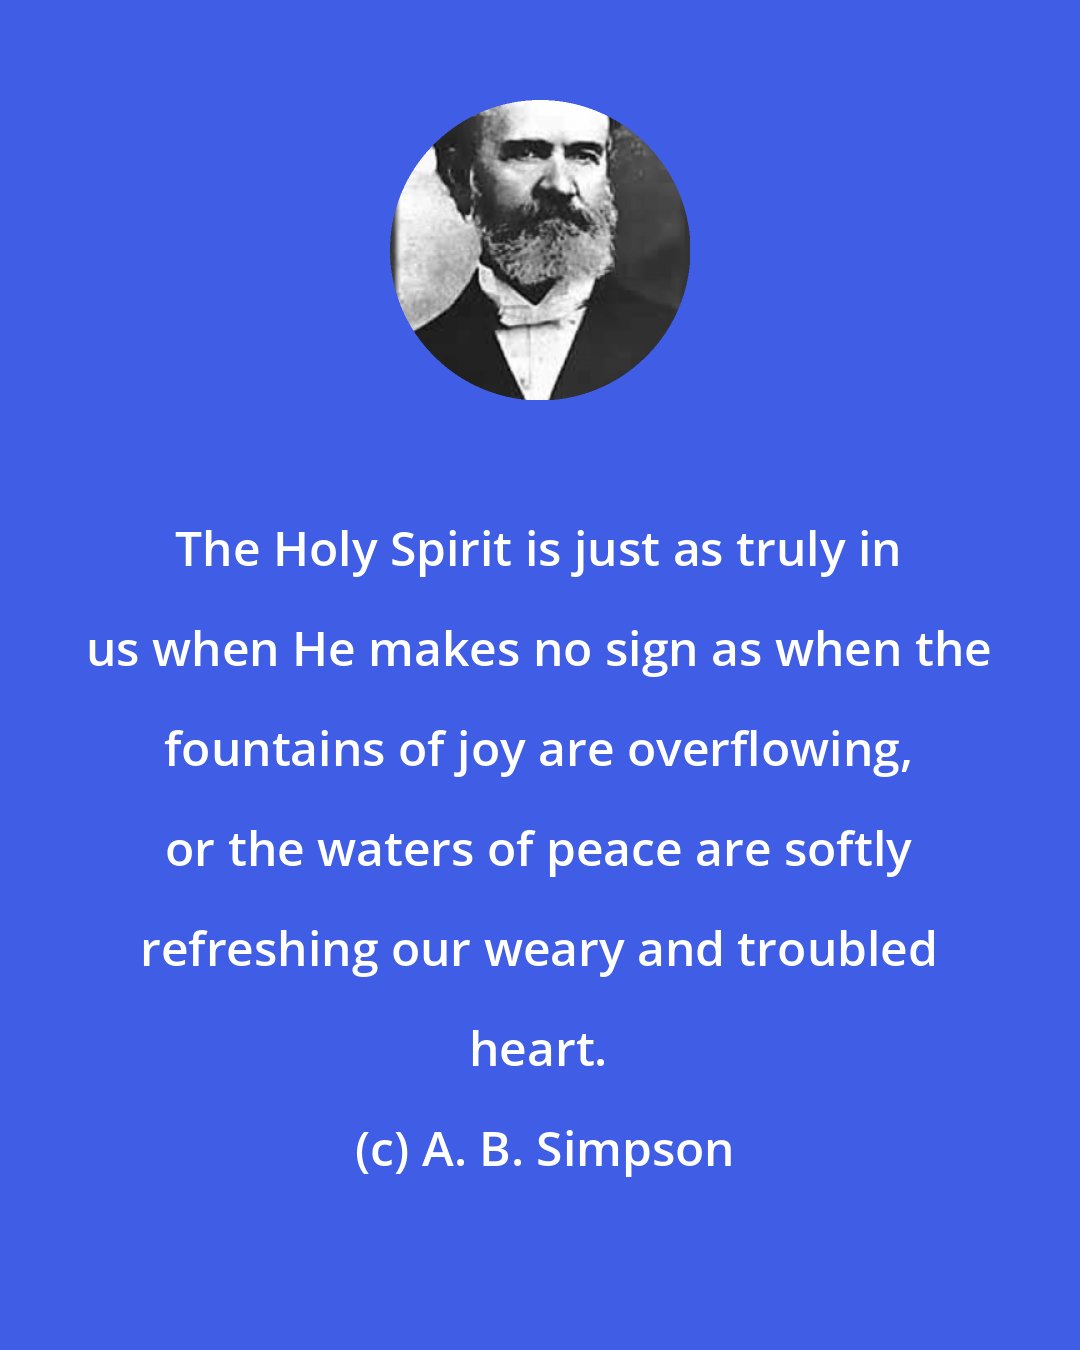 A. B. Simpson: The Holy Spirit is just as truly in us when He makes no sign as when the fountains of joy are overflowing, or the waters of peace are softly refreshing our weary and troubled heart.